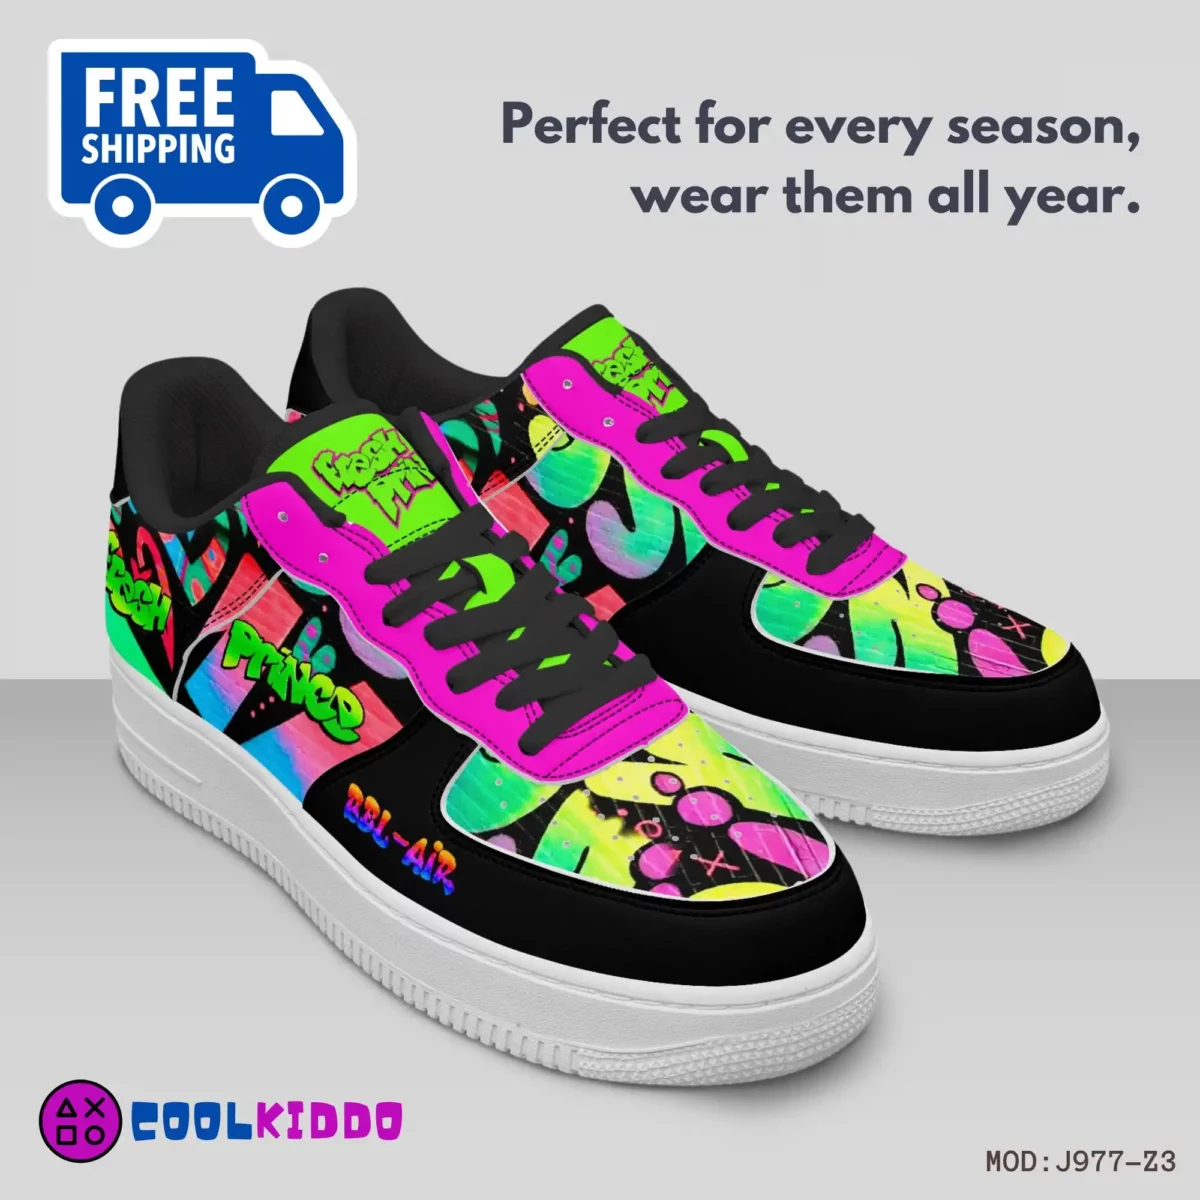 Custom Fresh Prince of Bel-Air AF1 Low-Top Leather Sneakers, Casual Shoes for any season. 90’s TV Show Inspired Cool Kiddo 12